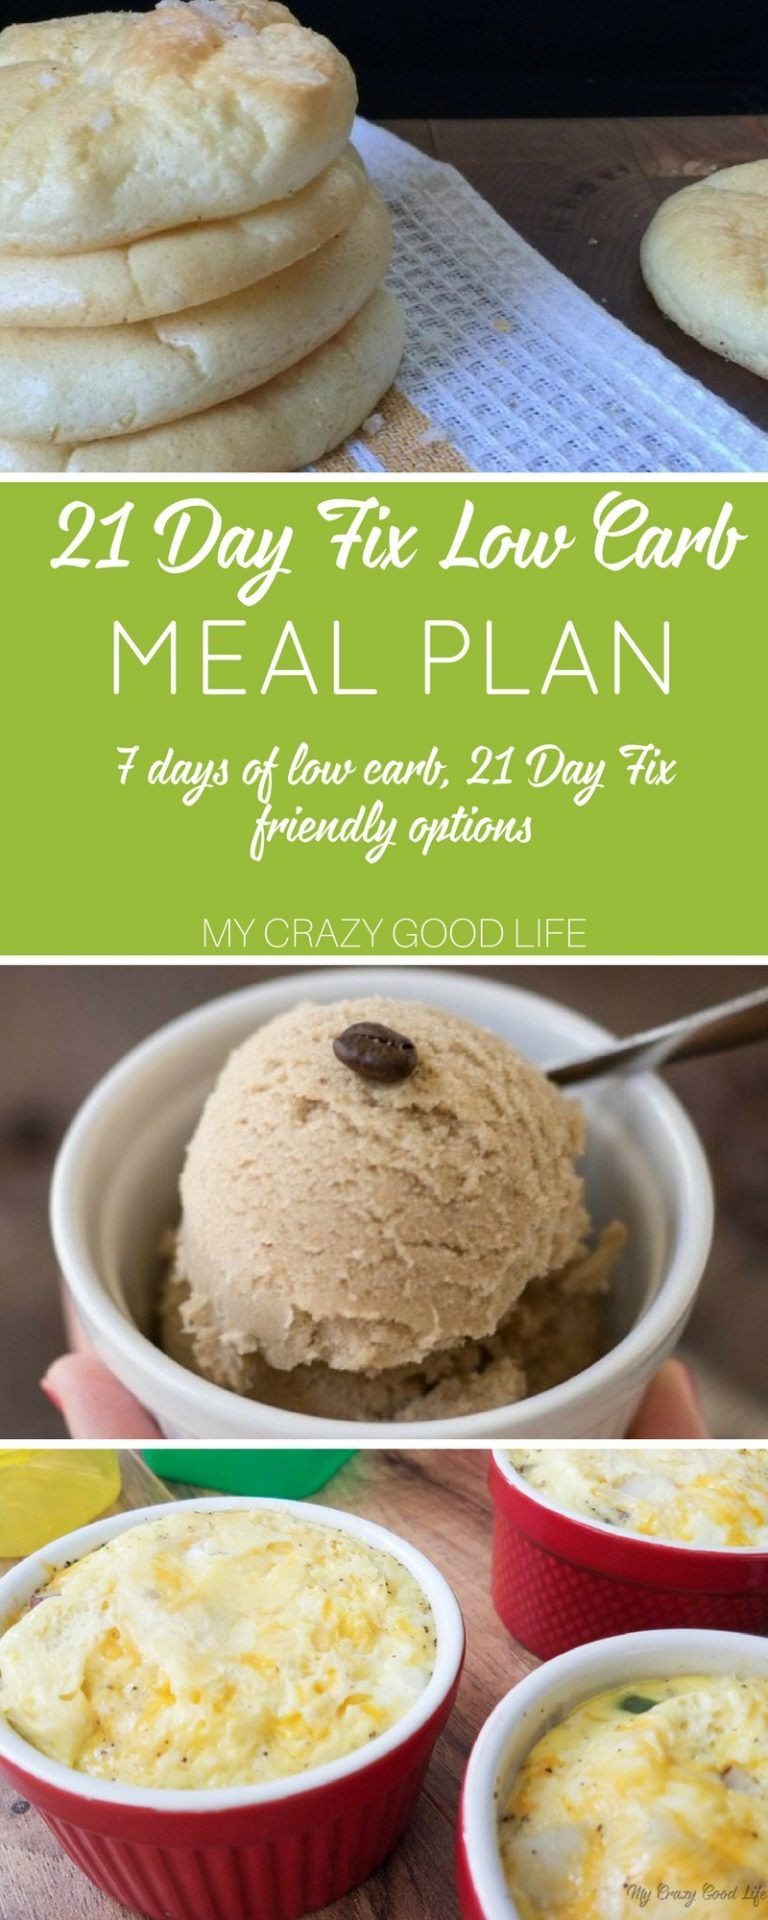 Low Carb Diet Plan 21 Days Meal Ideas
 21 Day Fix Low Carb Meal Plan Ideas